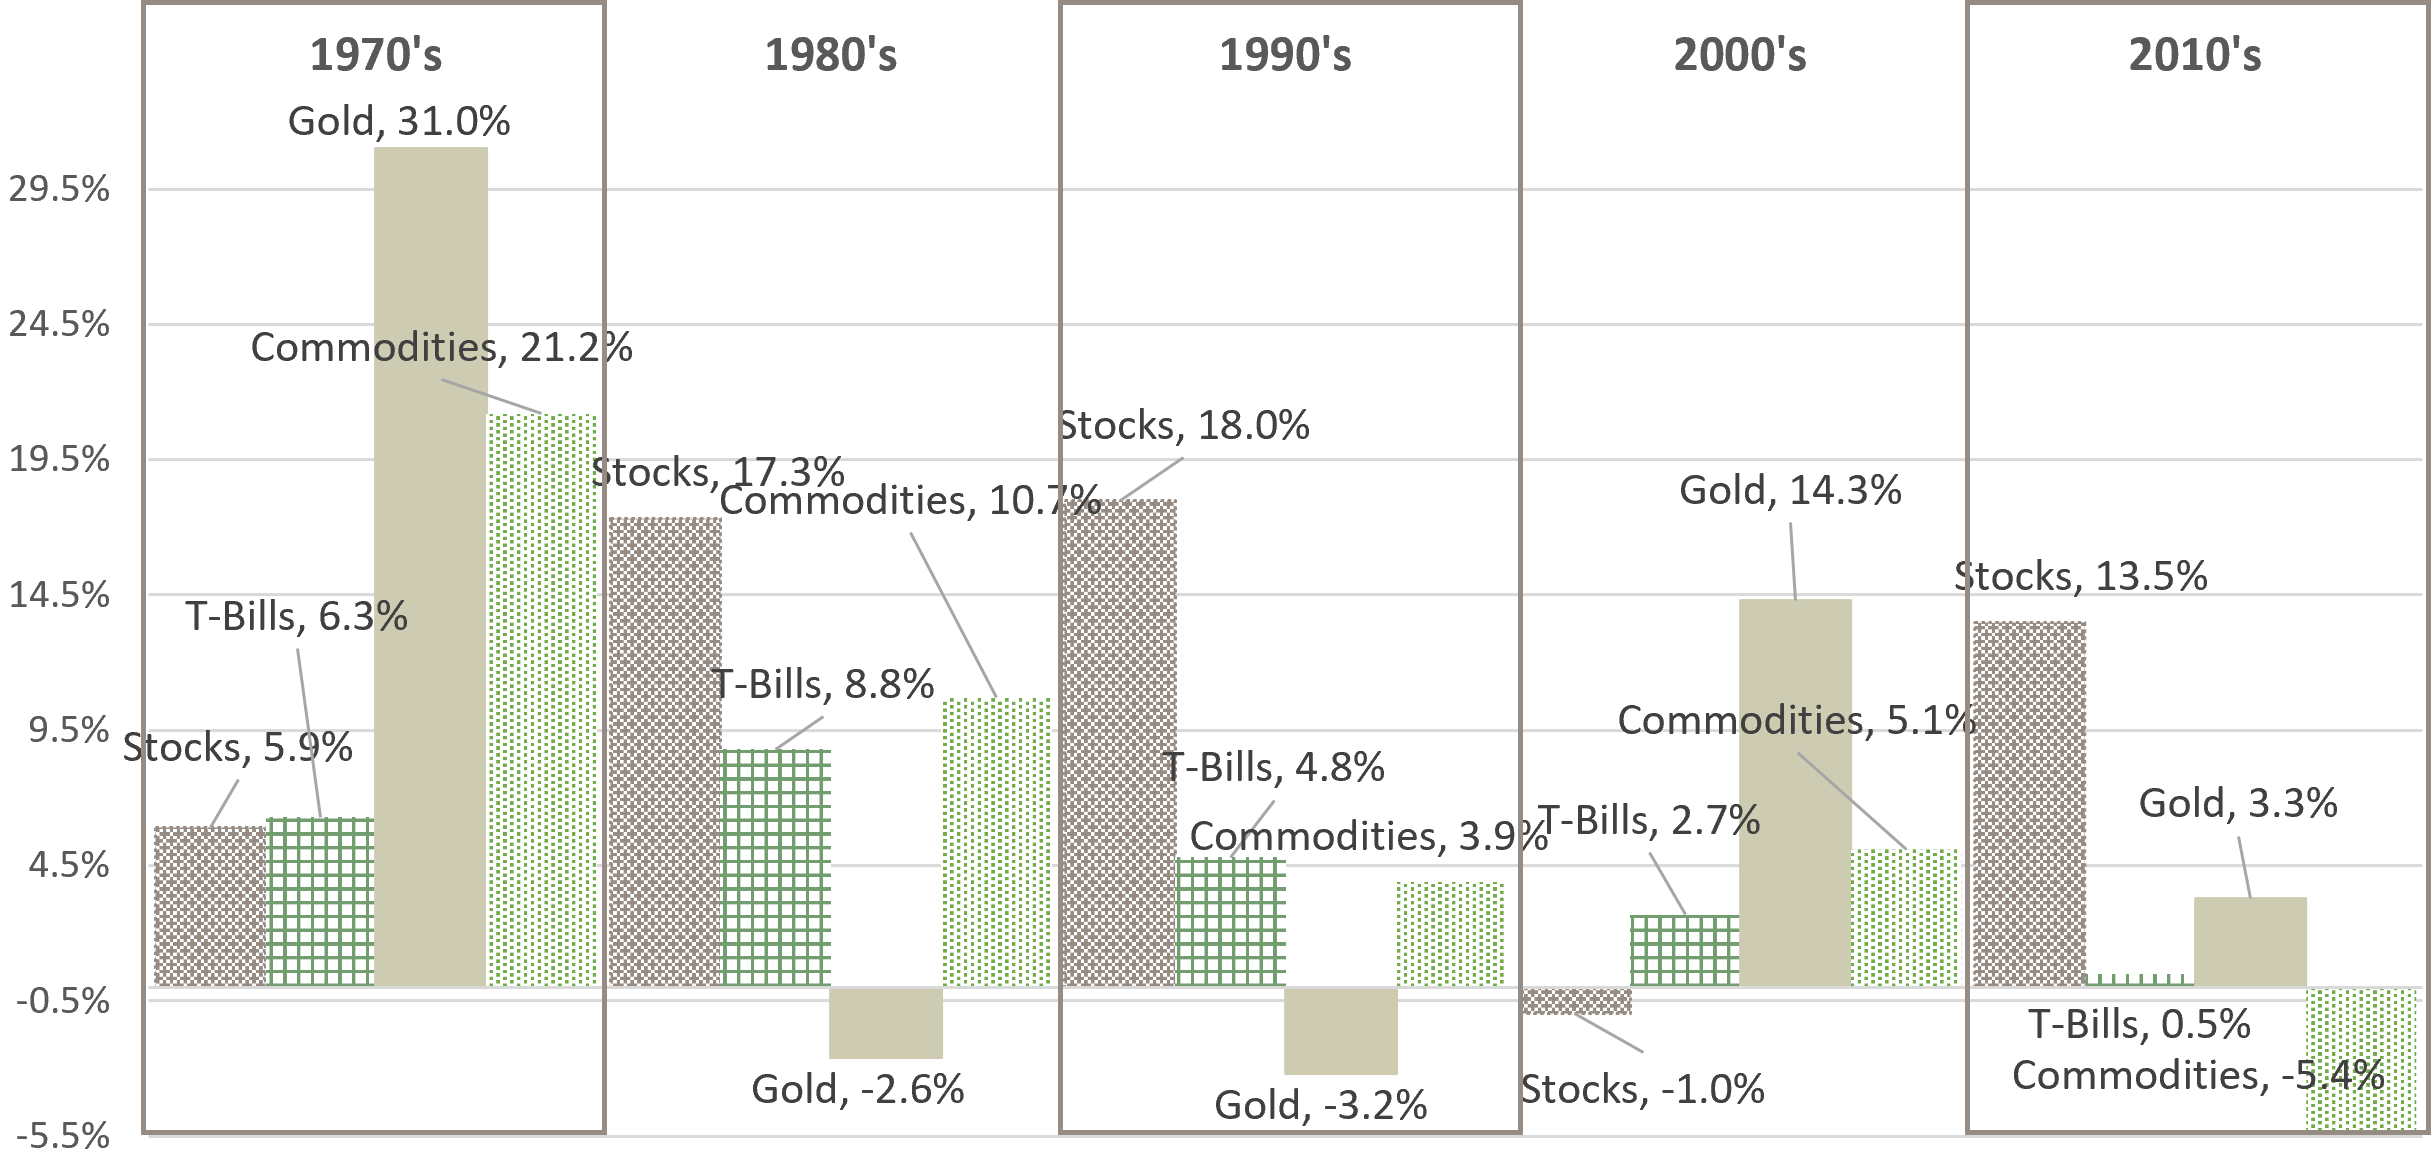 Bar chart comparing average annual returns of gold, commodities, stocks, and T-Bills across four decades: 1970s, 1980s, 1990s, and 2010s. Each decade is represented by a distinct color and pattern for the bars. Gold had the highest returns in the 1970s at 31.0%, while commodities led in the 1980s at 21.2%. The 1990s and 2010s saw stocks with the highest returns at 18.0% and 13.5% respectively. Negative returns are shown for gold in the 1980s and 1990s, and for stocks in the 2000s.